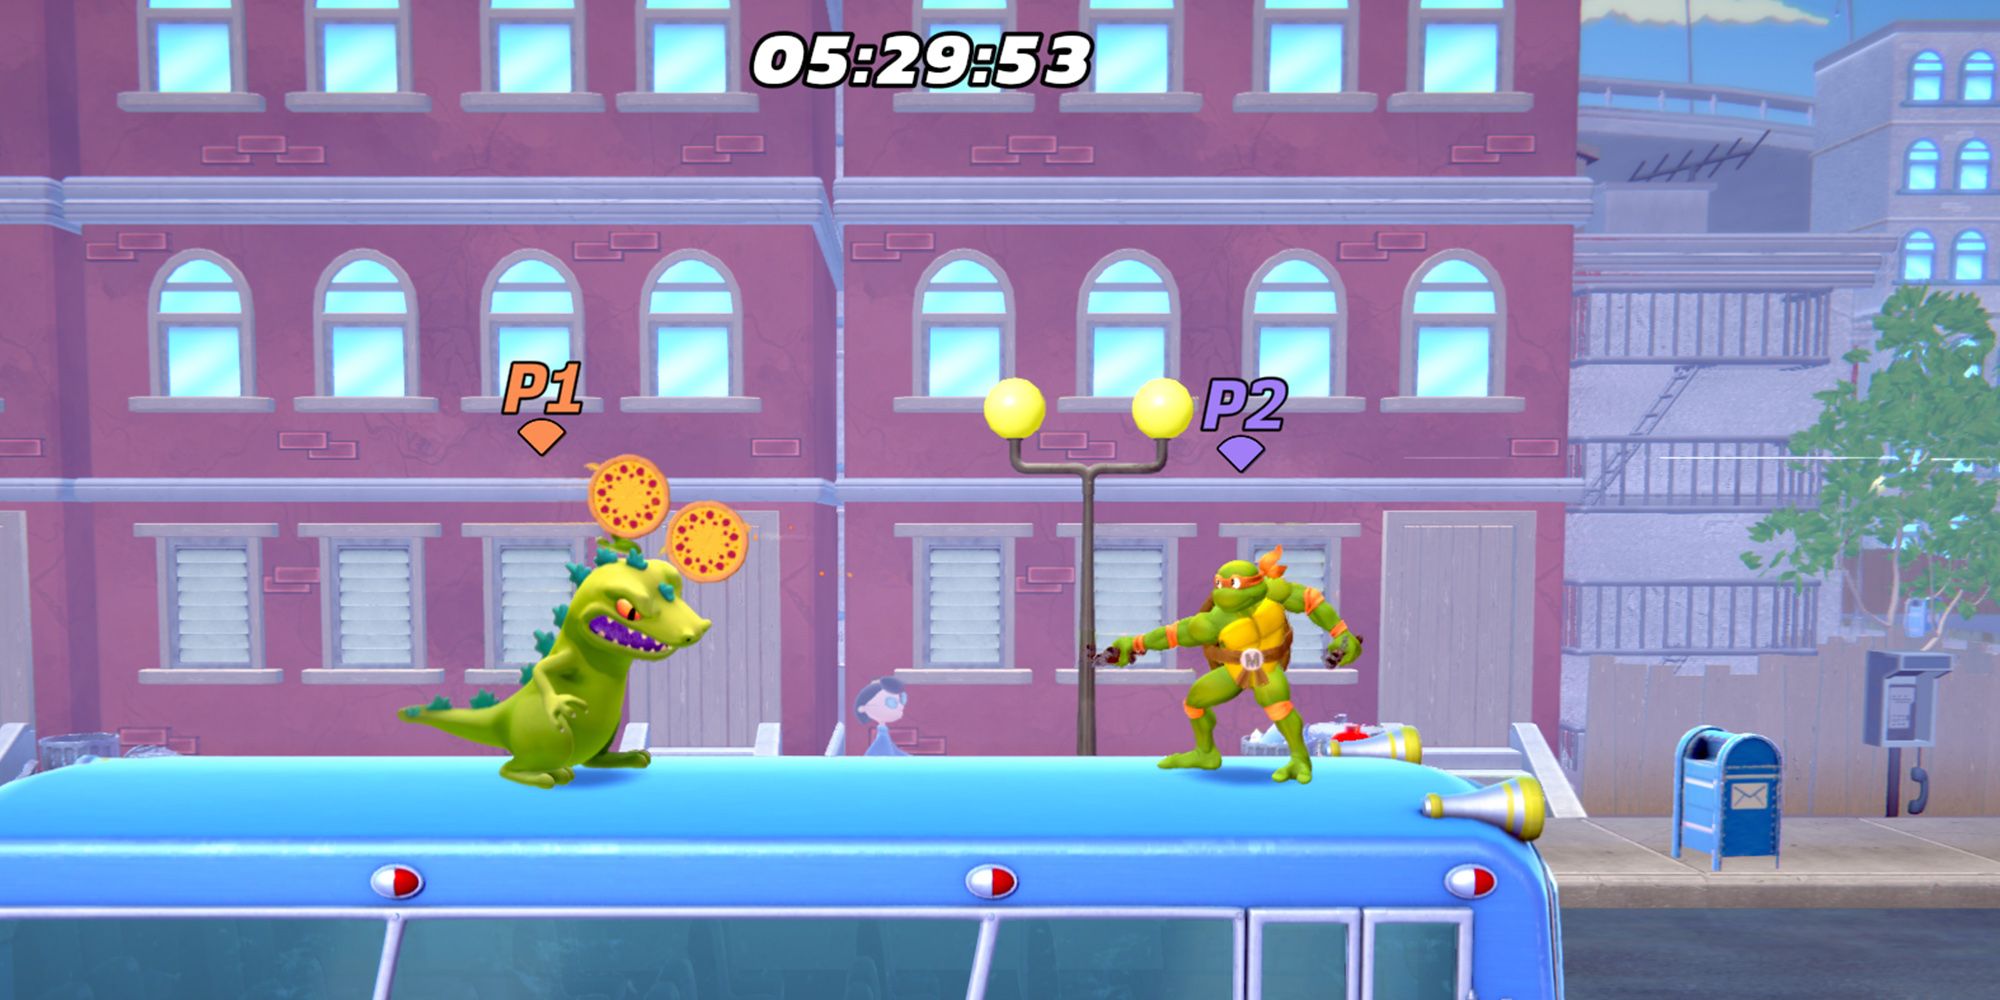 Nickelodeon All-Star Brawl - Reptar Catching One Of Michelangelo's Pizza Projectiles